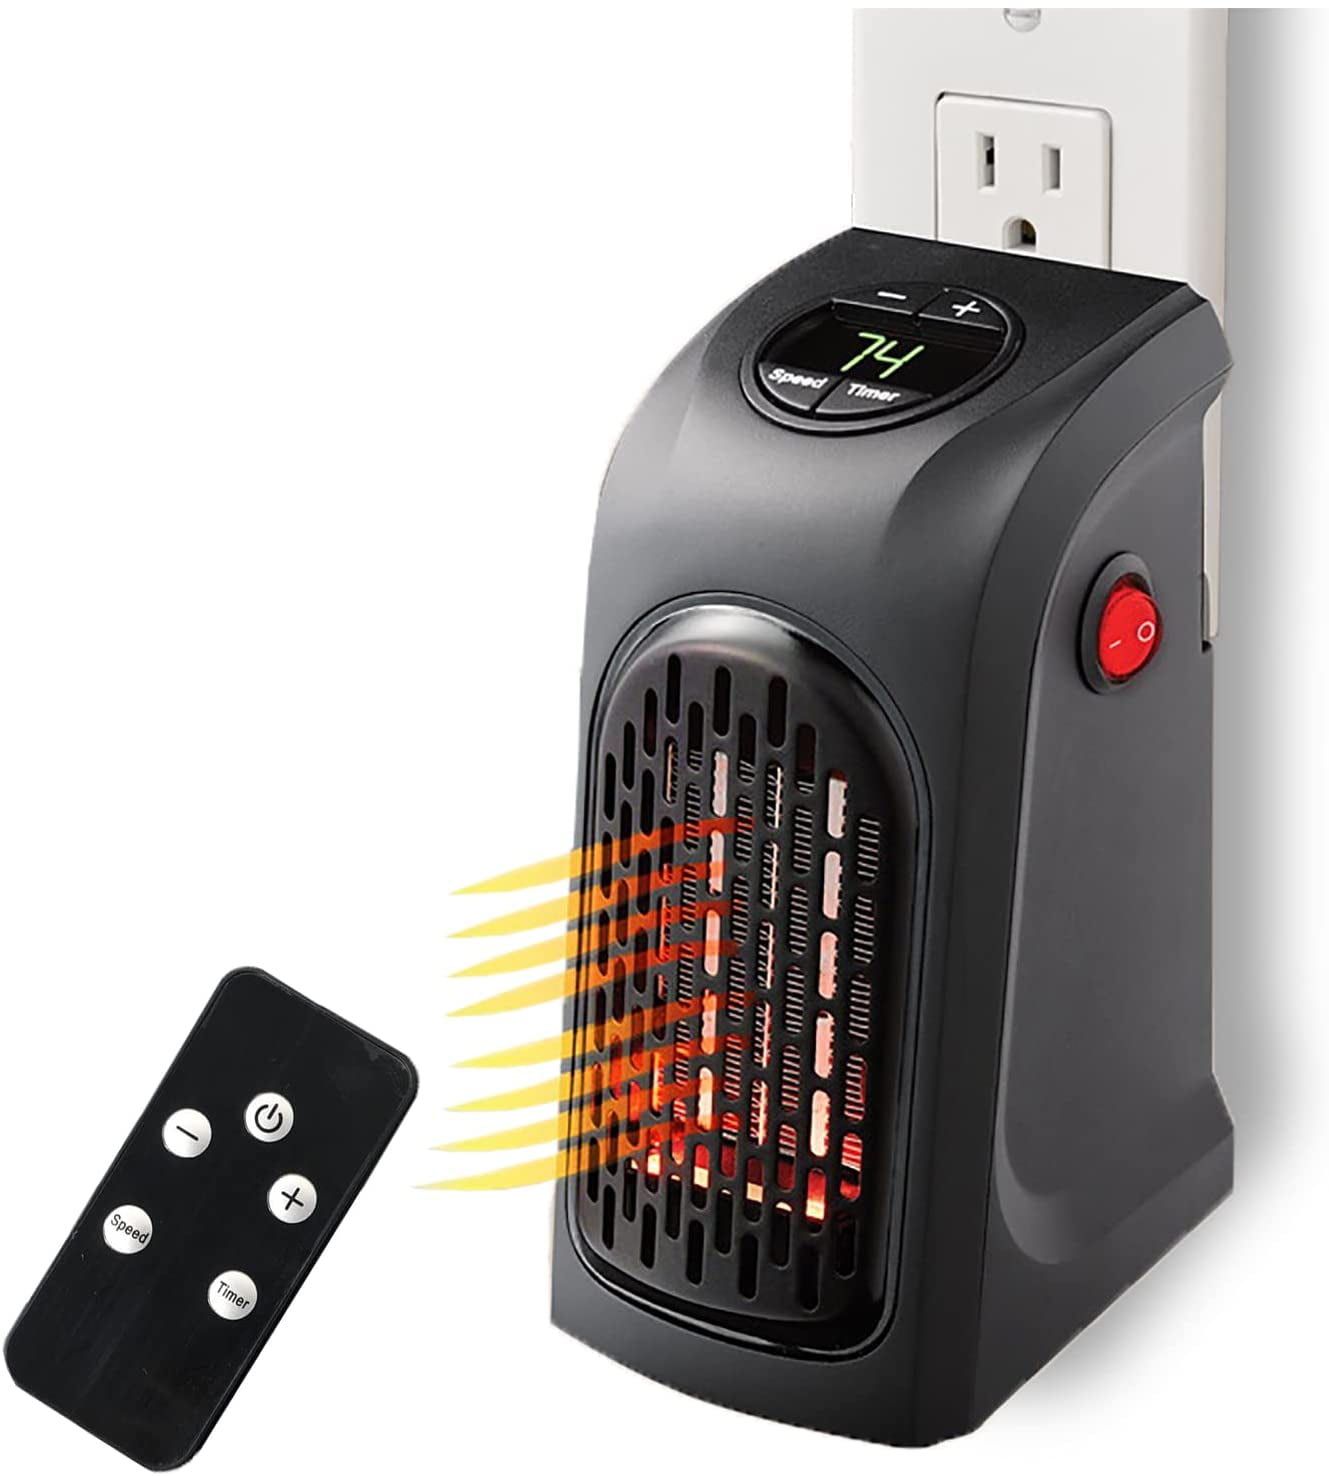 Programmable Space Heater with LED Display Screen & Fireplace Flame Effect Portable Wall Outlet Electric Heater with Adjustable Thermostat & Timer for Home Office Indoor Use 400 Watt ETL Listed